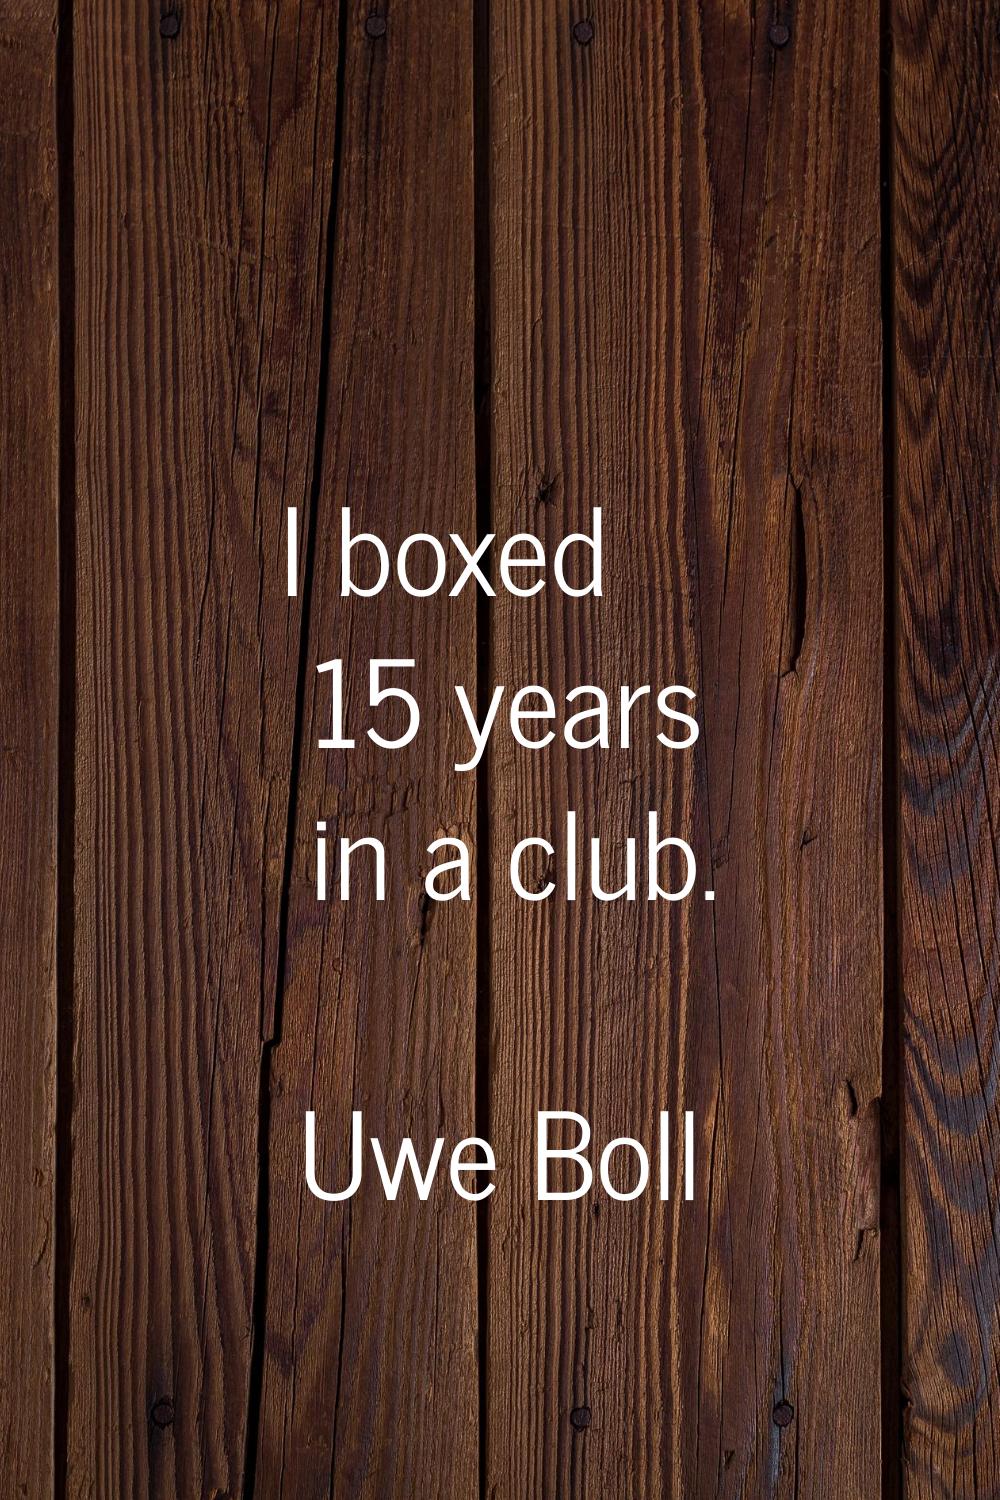 I boxed 15 years in a club.